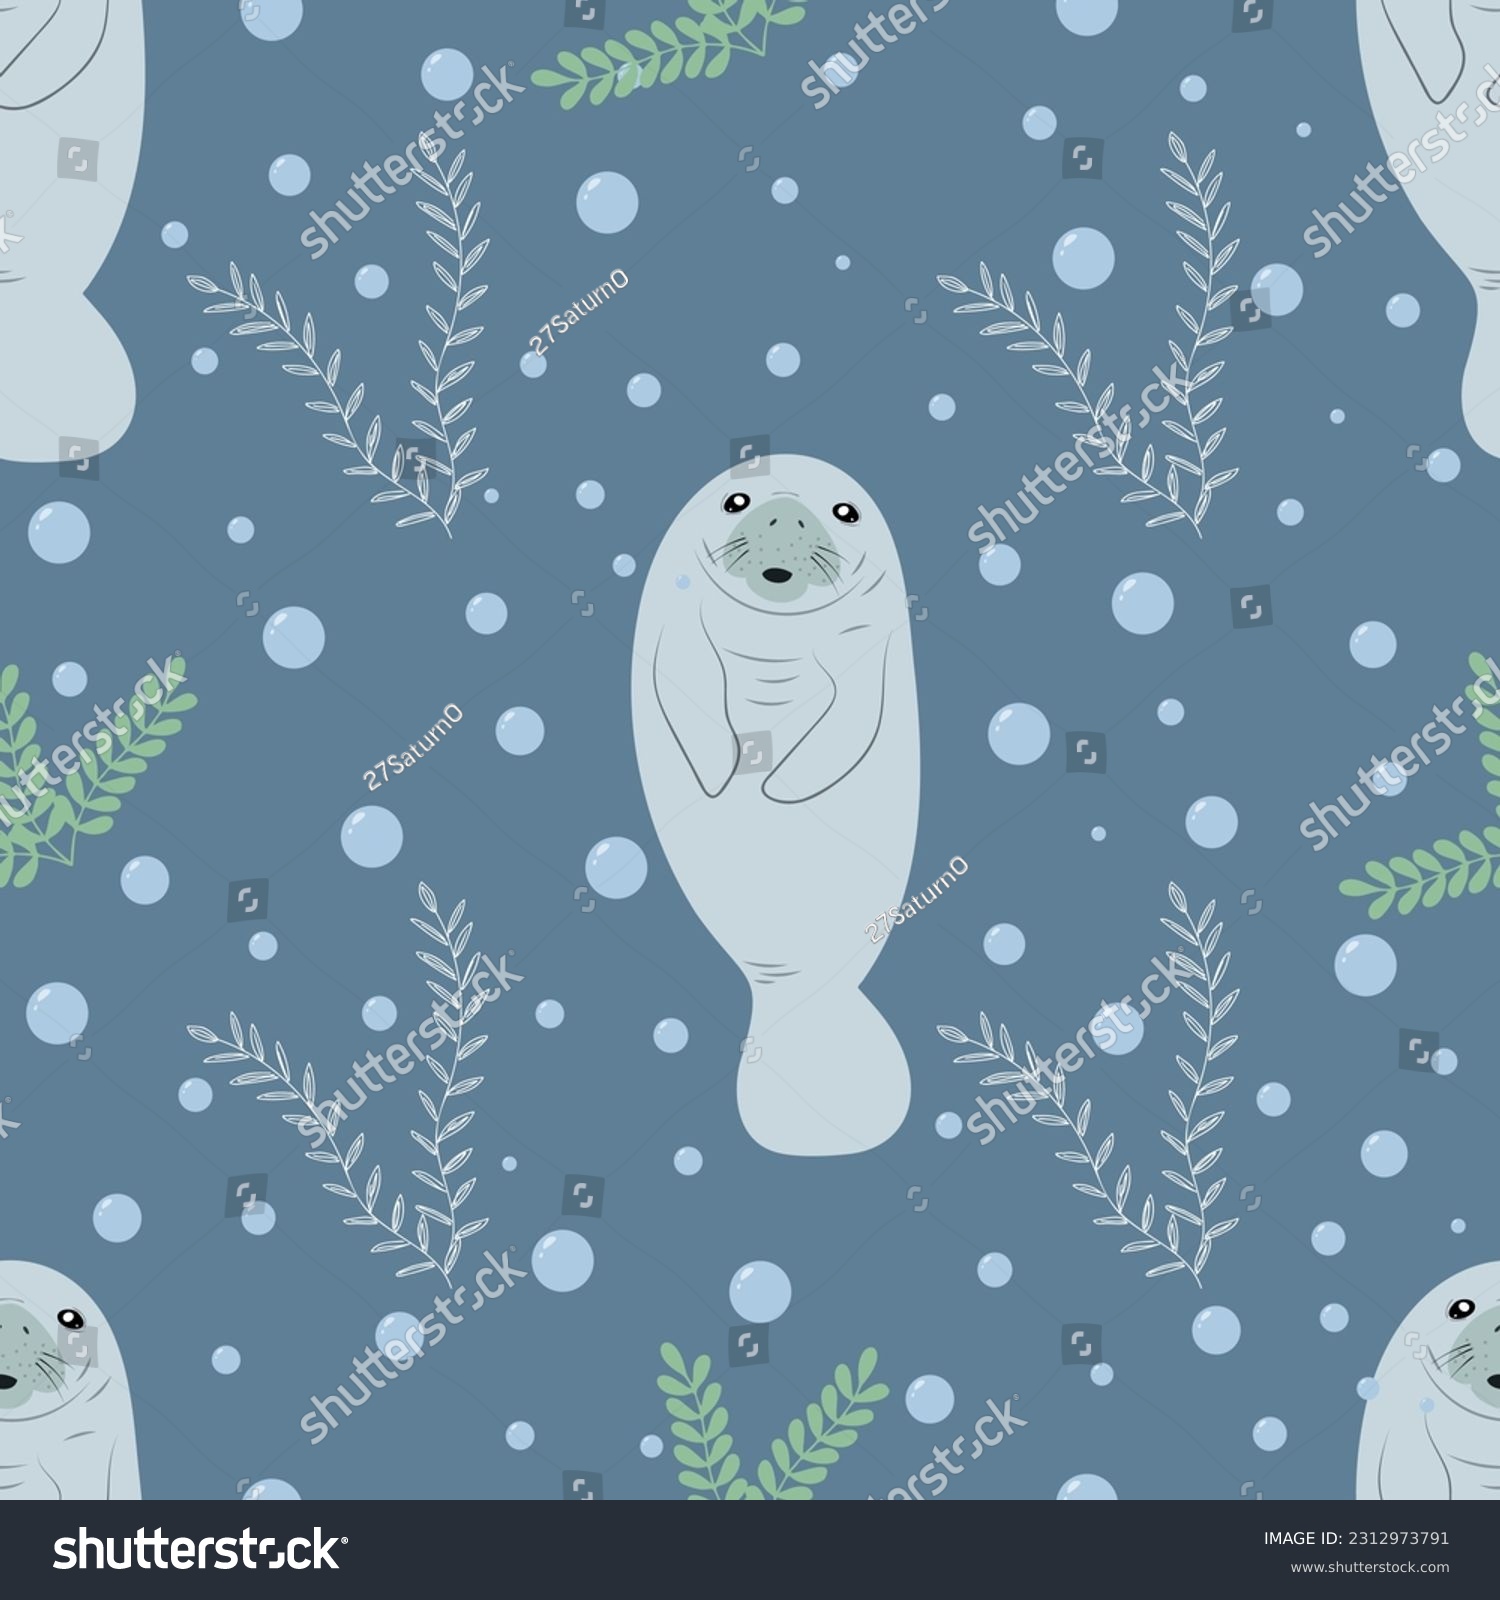 SVG of Childish seamless patter with manatee. Blue background with cartoon animal. Vector illustration for fabric, wrapping, textile, wallpaper, apparel. svg